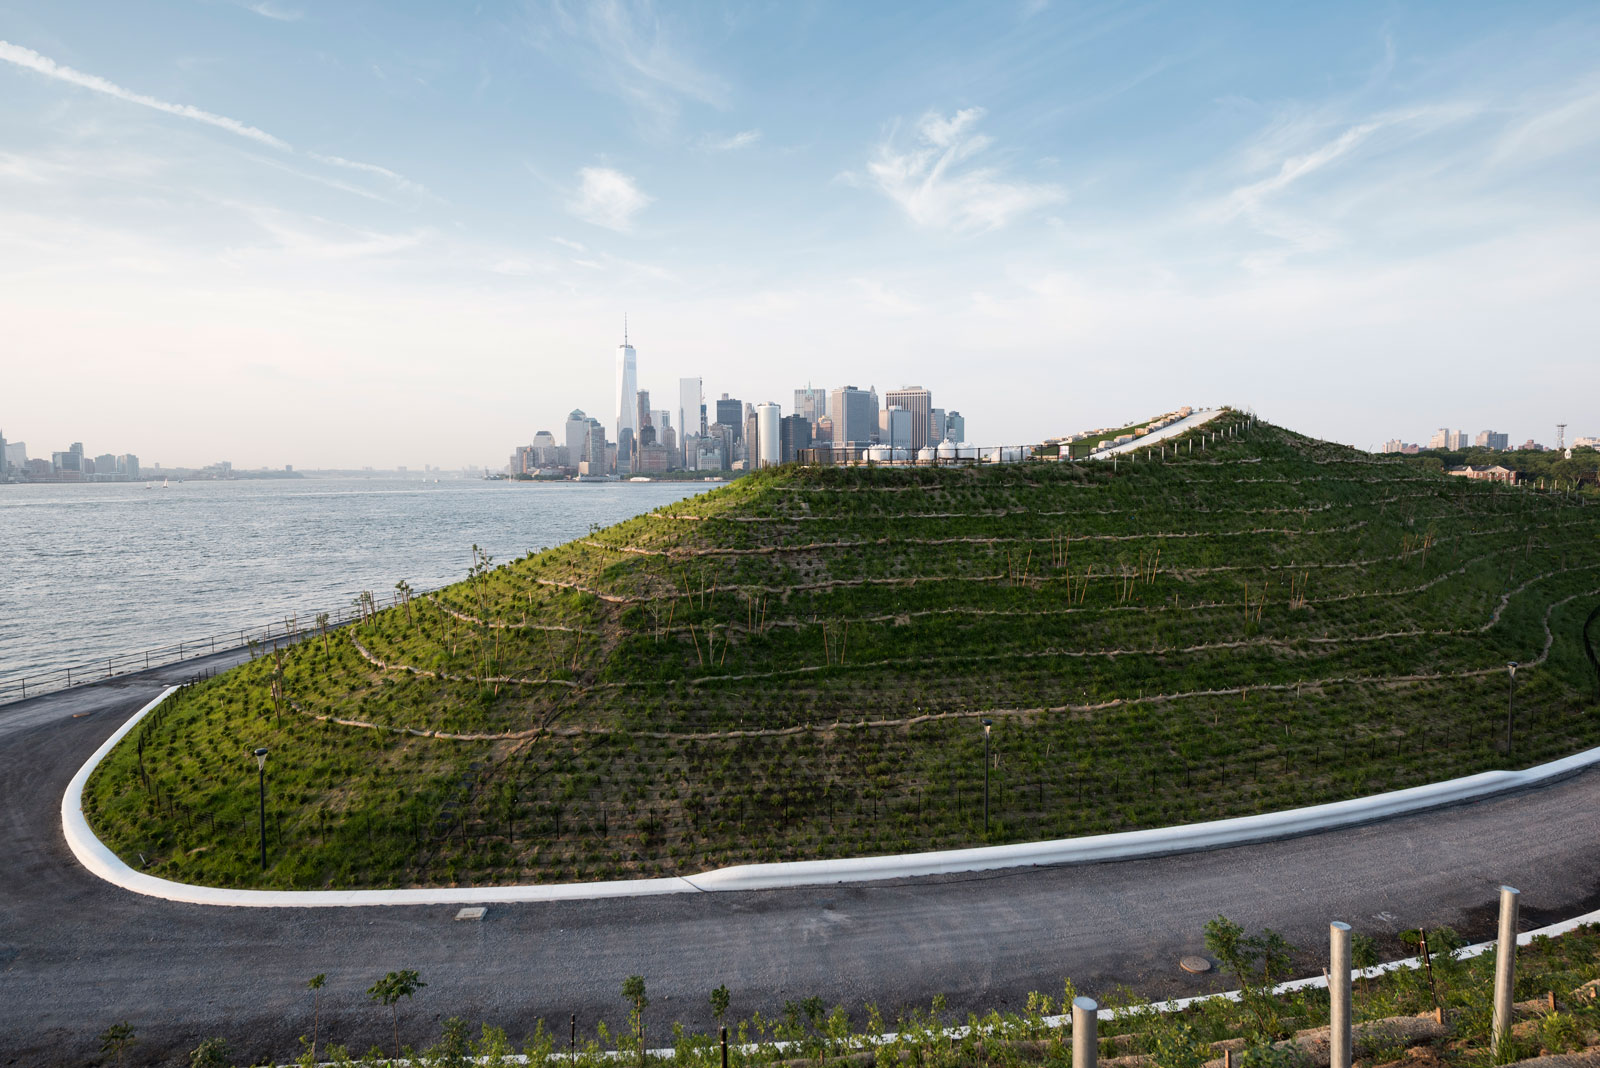 View of Outlook Hill and lower Manhattan in the distance, Governors Island, New York, 2016